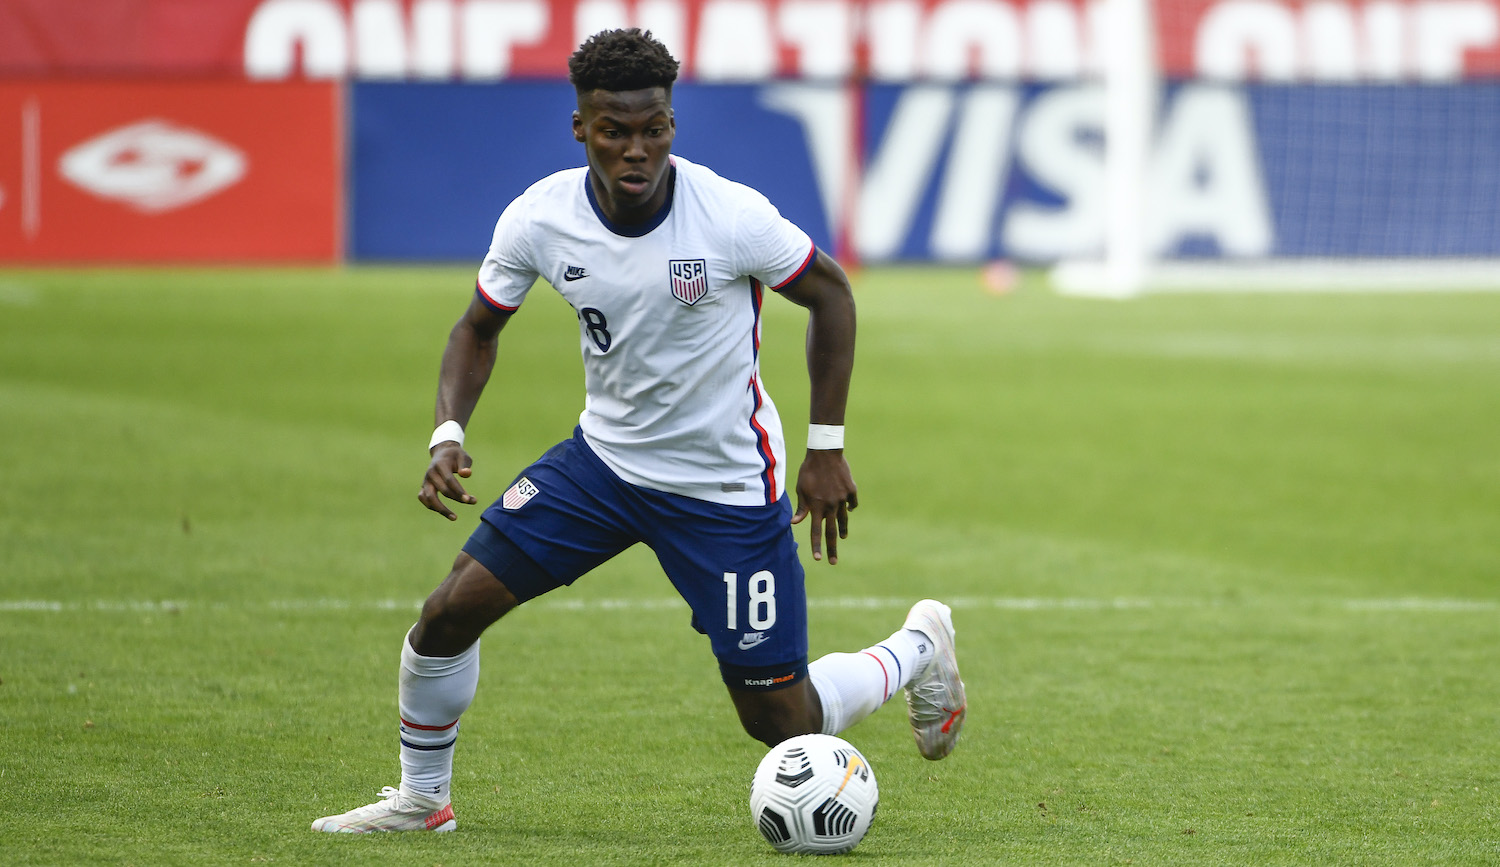 SANDY, UTAH - JUNE 09: Yunus Musah #18 of the United States in action during a game against Costa Rica at Rio Tinto Stadium on June 09, 2021 in Sandy, Utah. (Photo by Alex Goodlett/Getty Images)